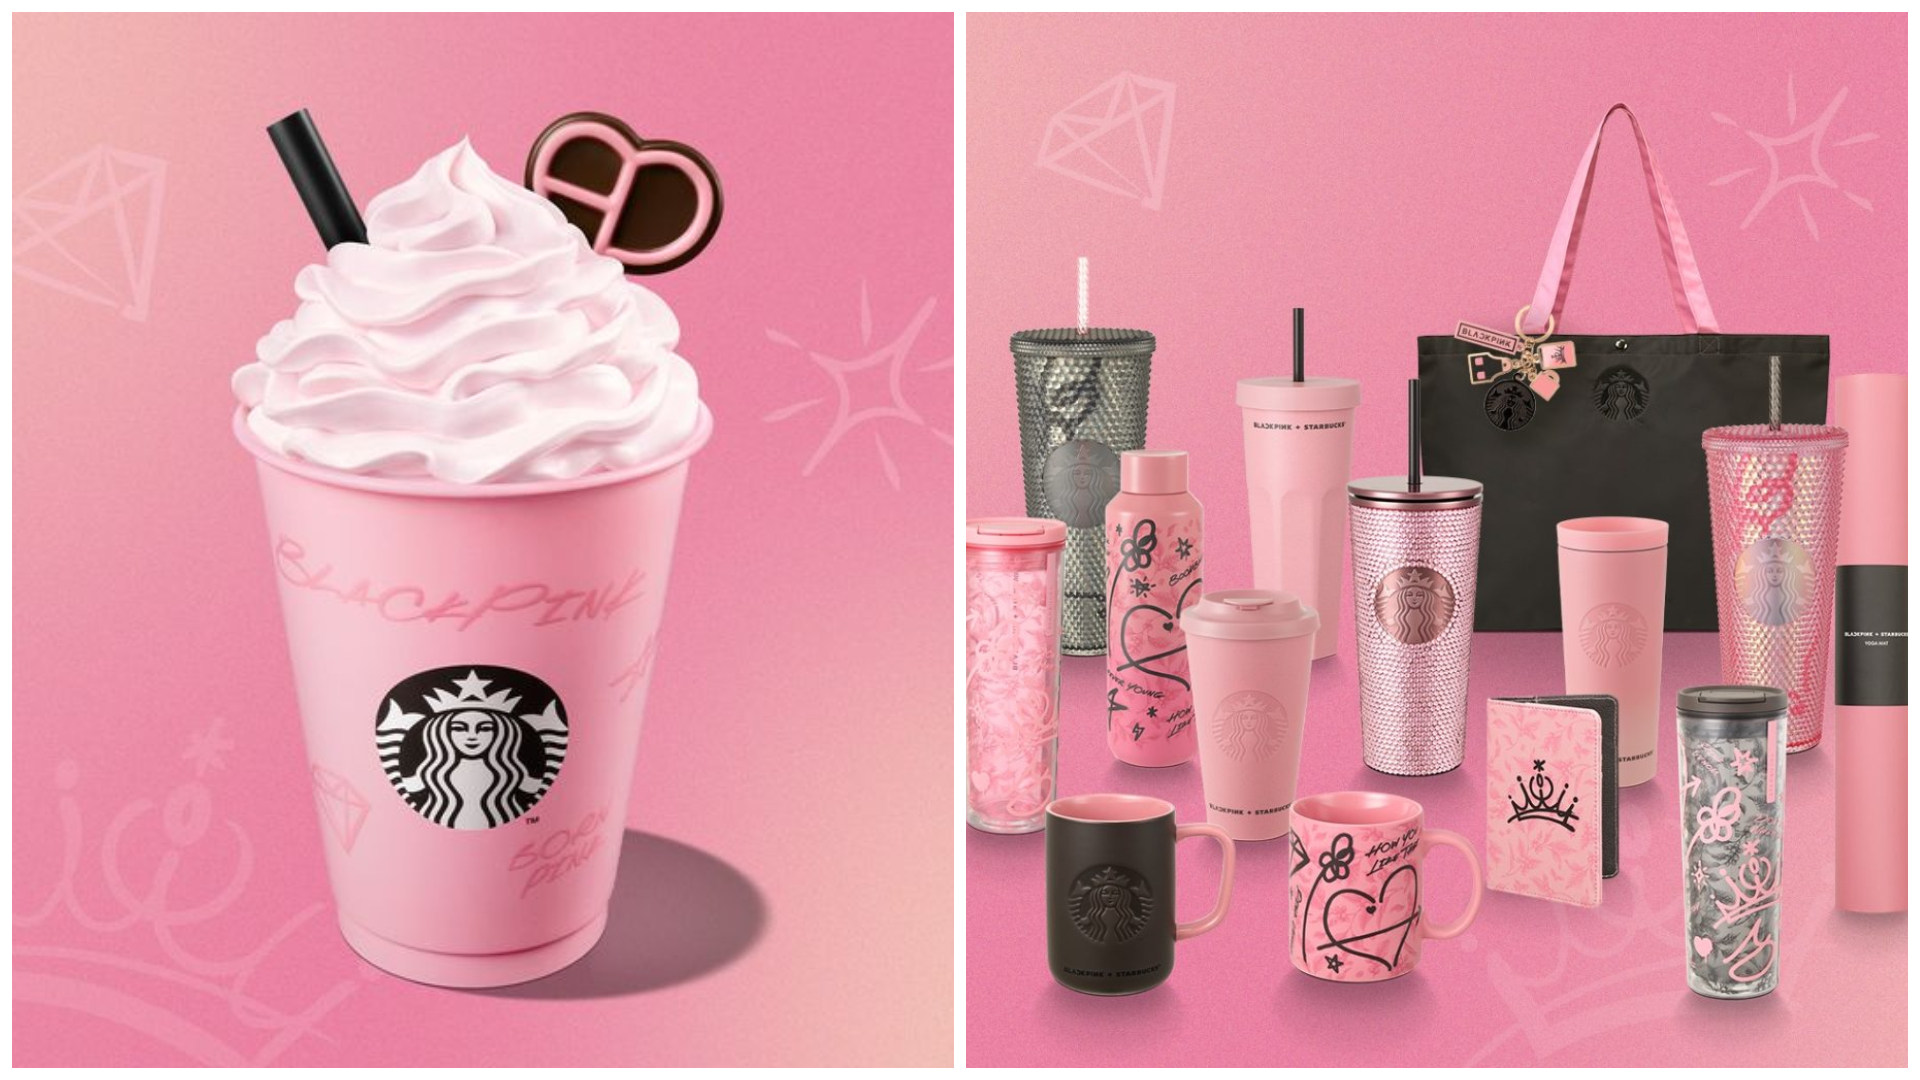 The BLACKPINK x Starbucks Collaboration Is Here Don't Miss Out!